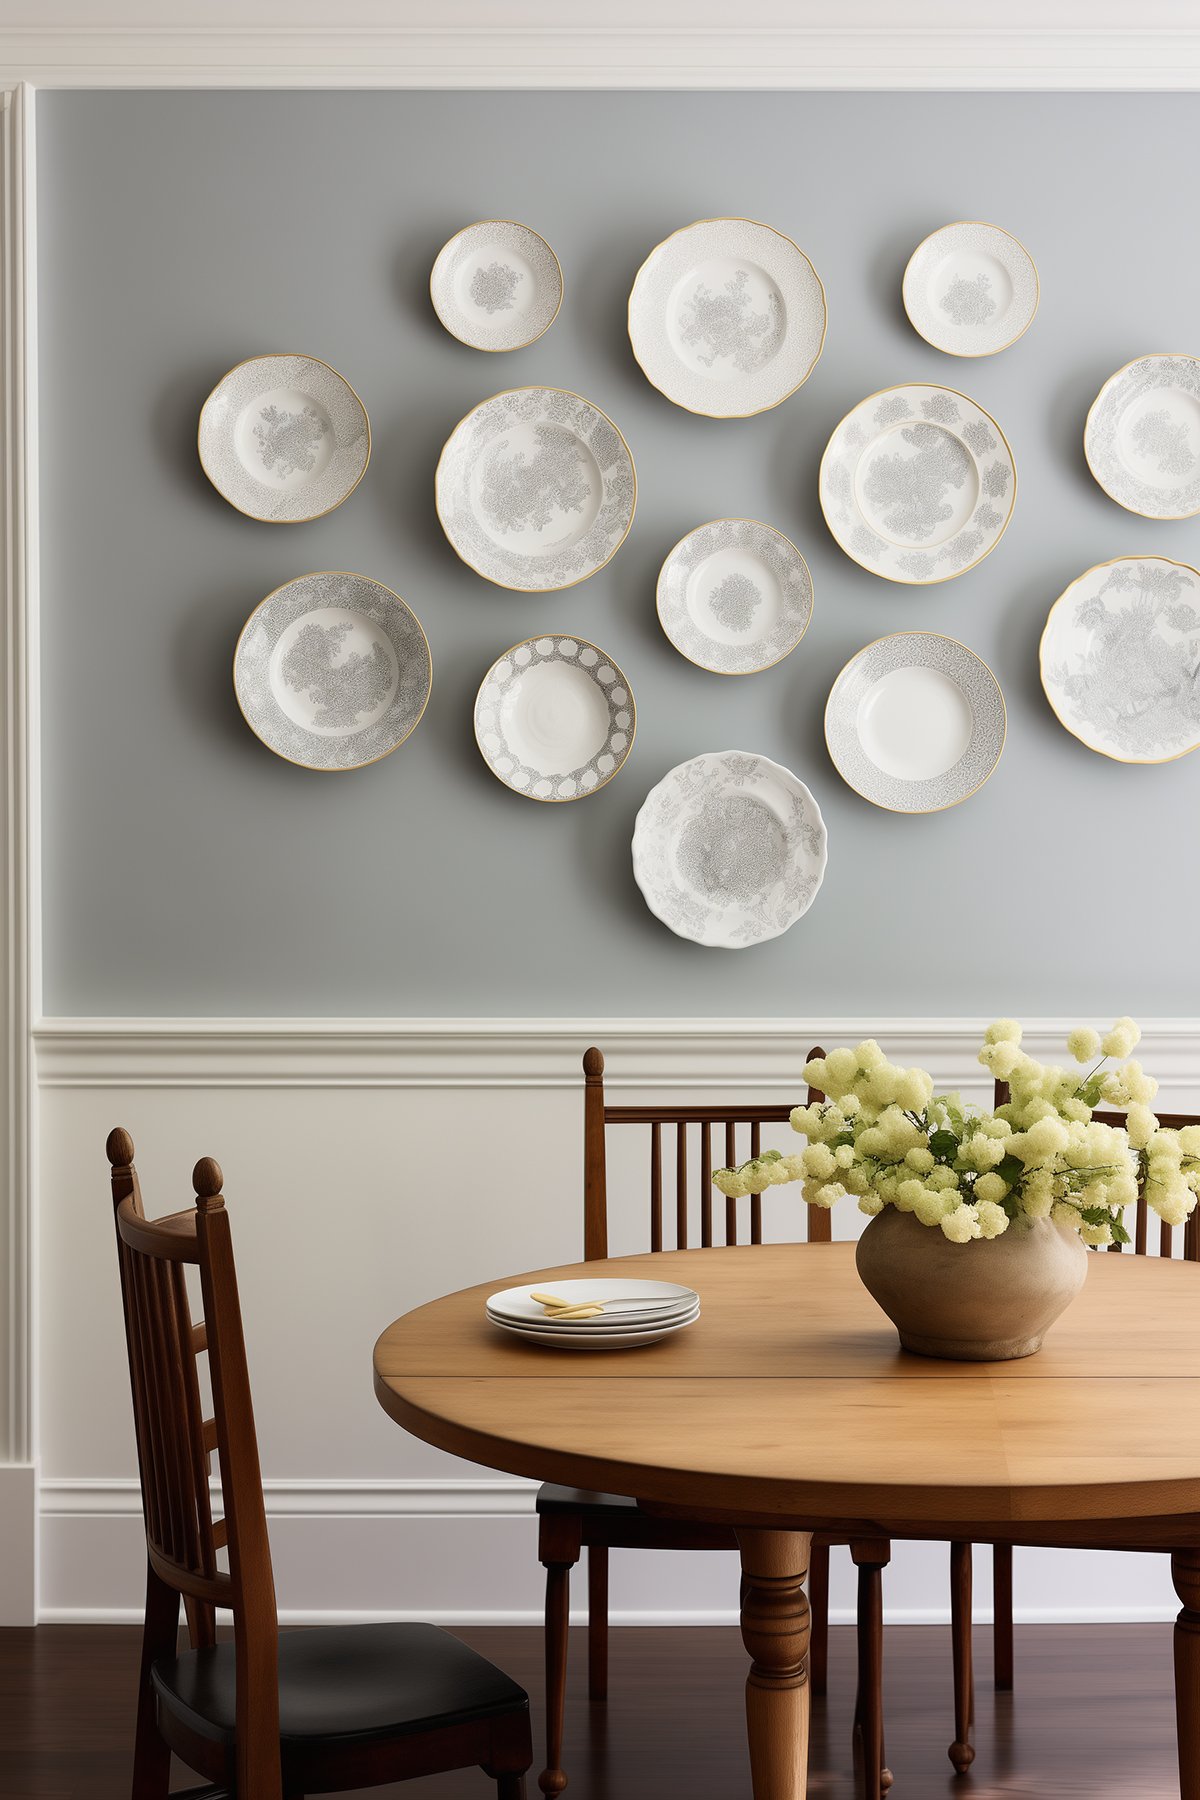 dining room wall with plates hanging on it and a round dining table